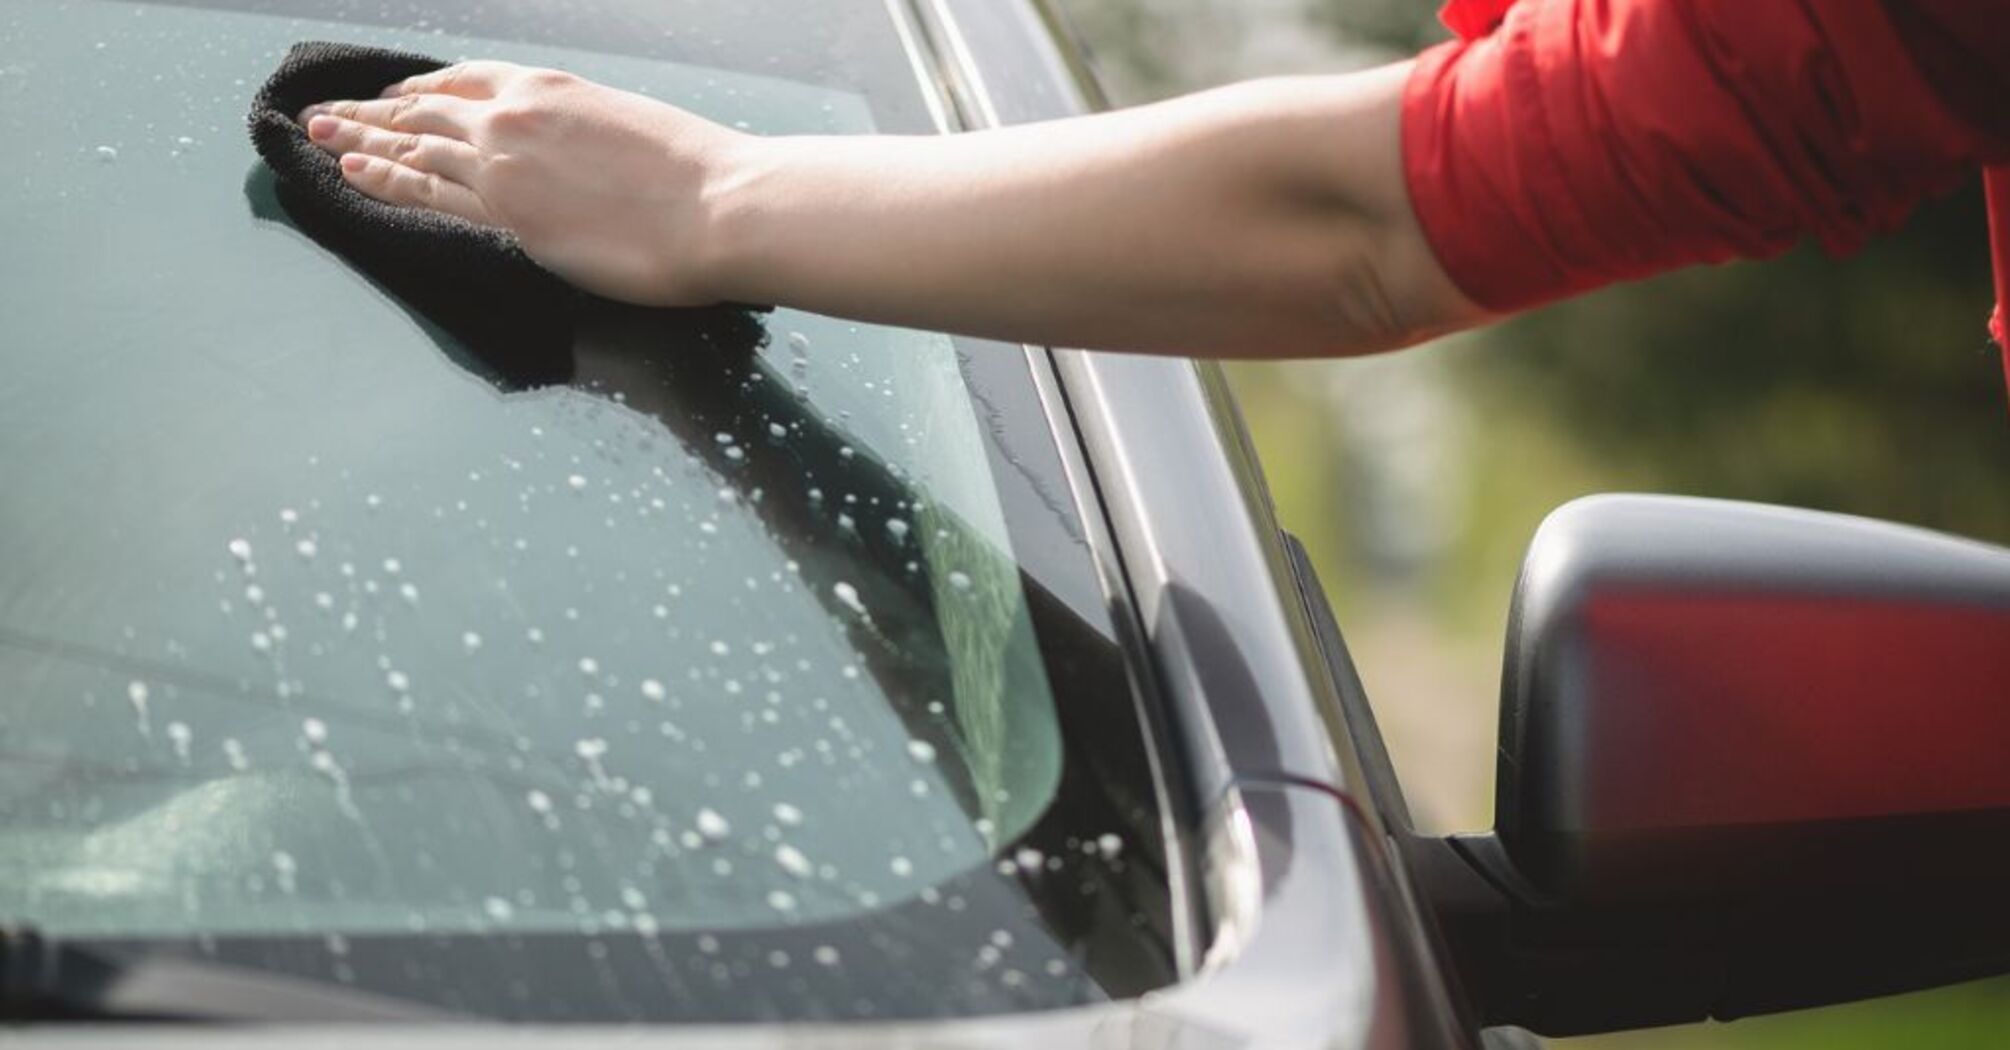 How to clean windshield from plaque